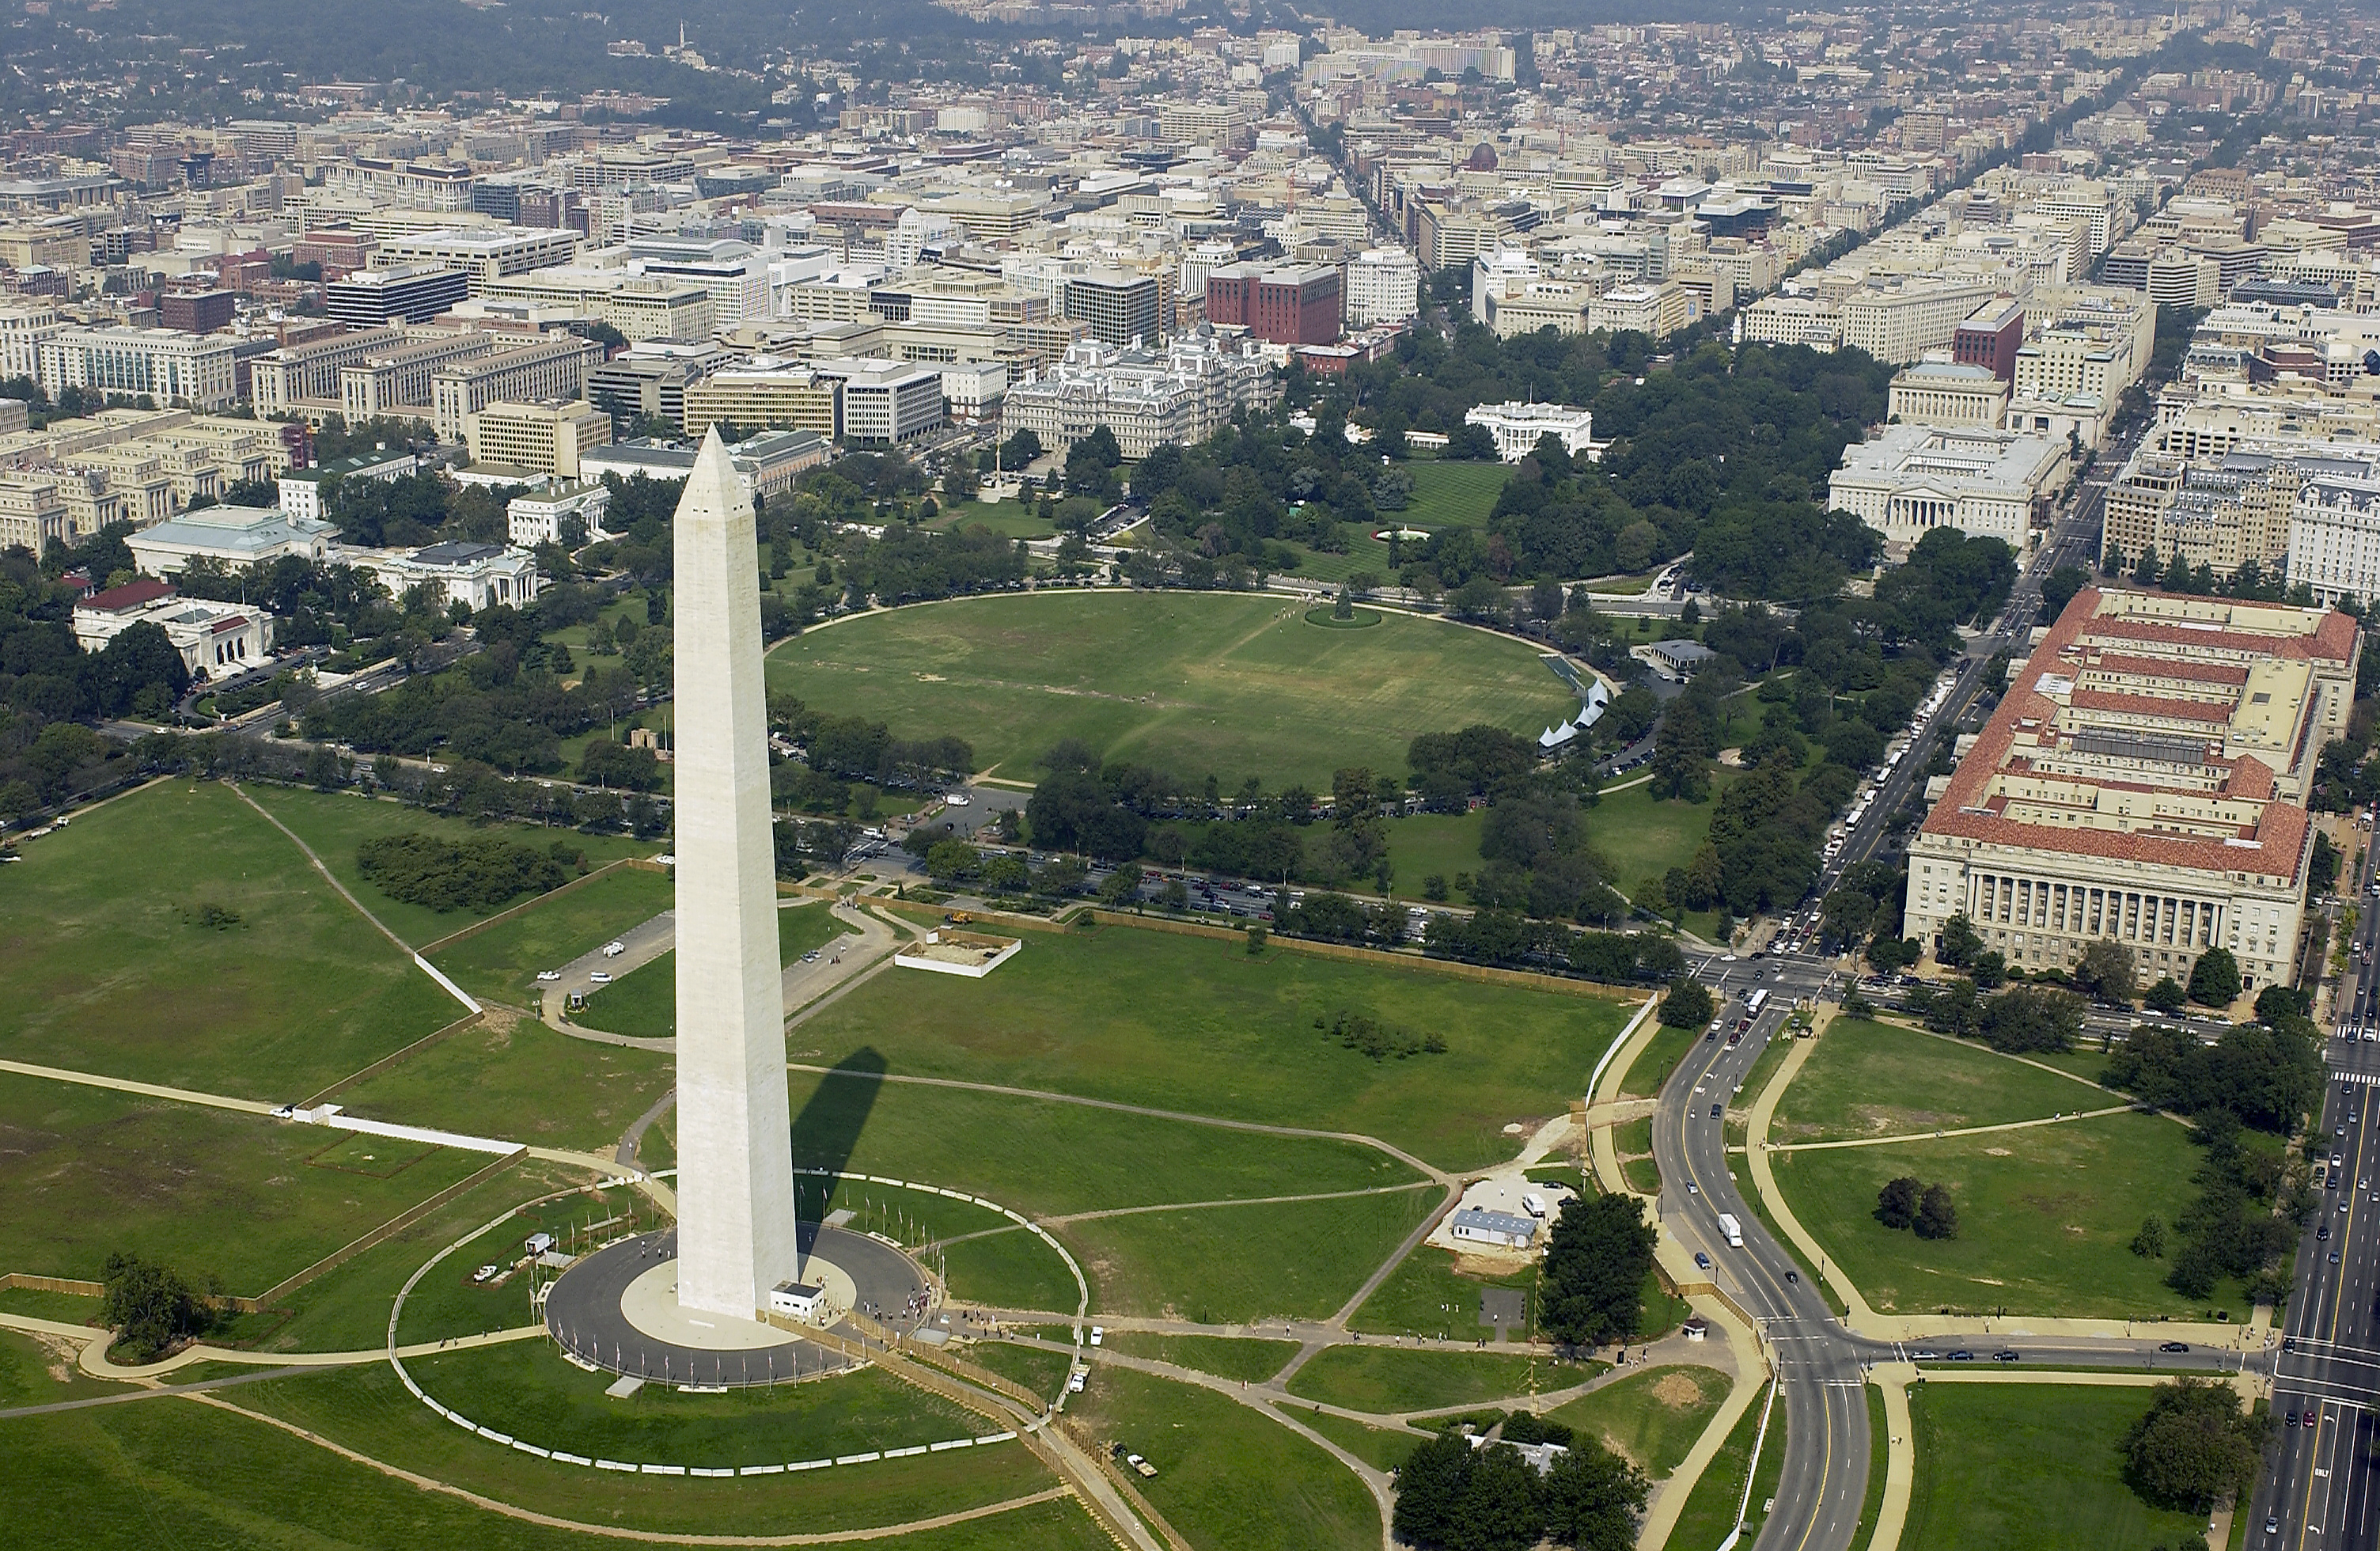 030926-F-2828D-080 Washington, D.C. (Sept. 26, 2003) -- Aerial view of the Washington Monument with the White House in the background. DoD photo by Tech. Sgt. Andy Dunaway. (RELEASED)